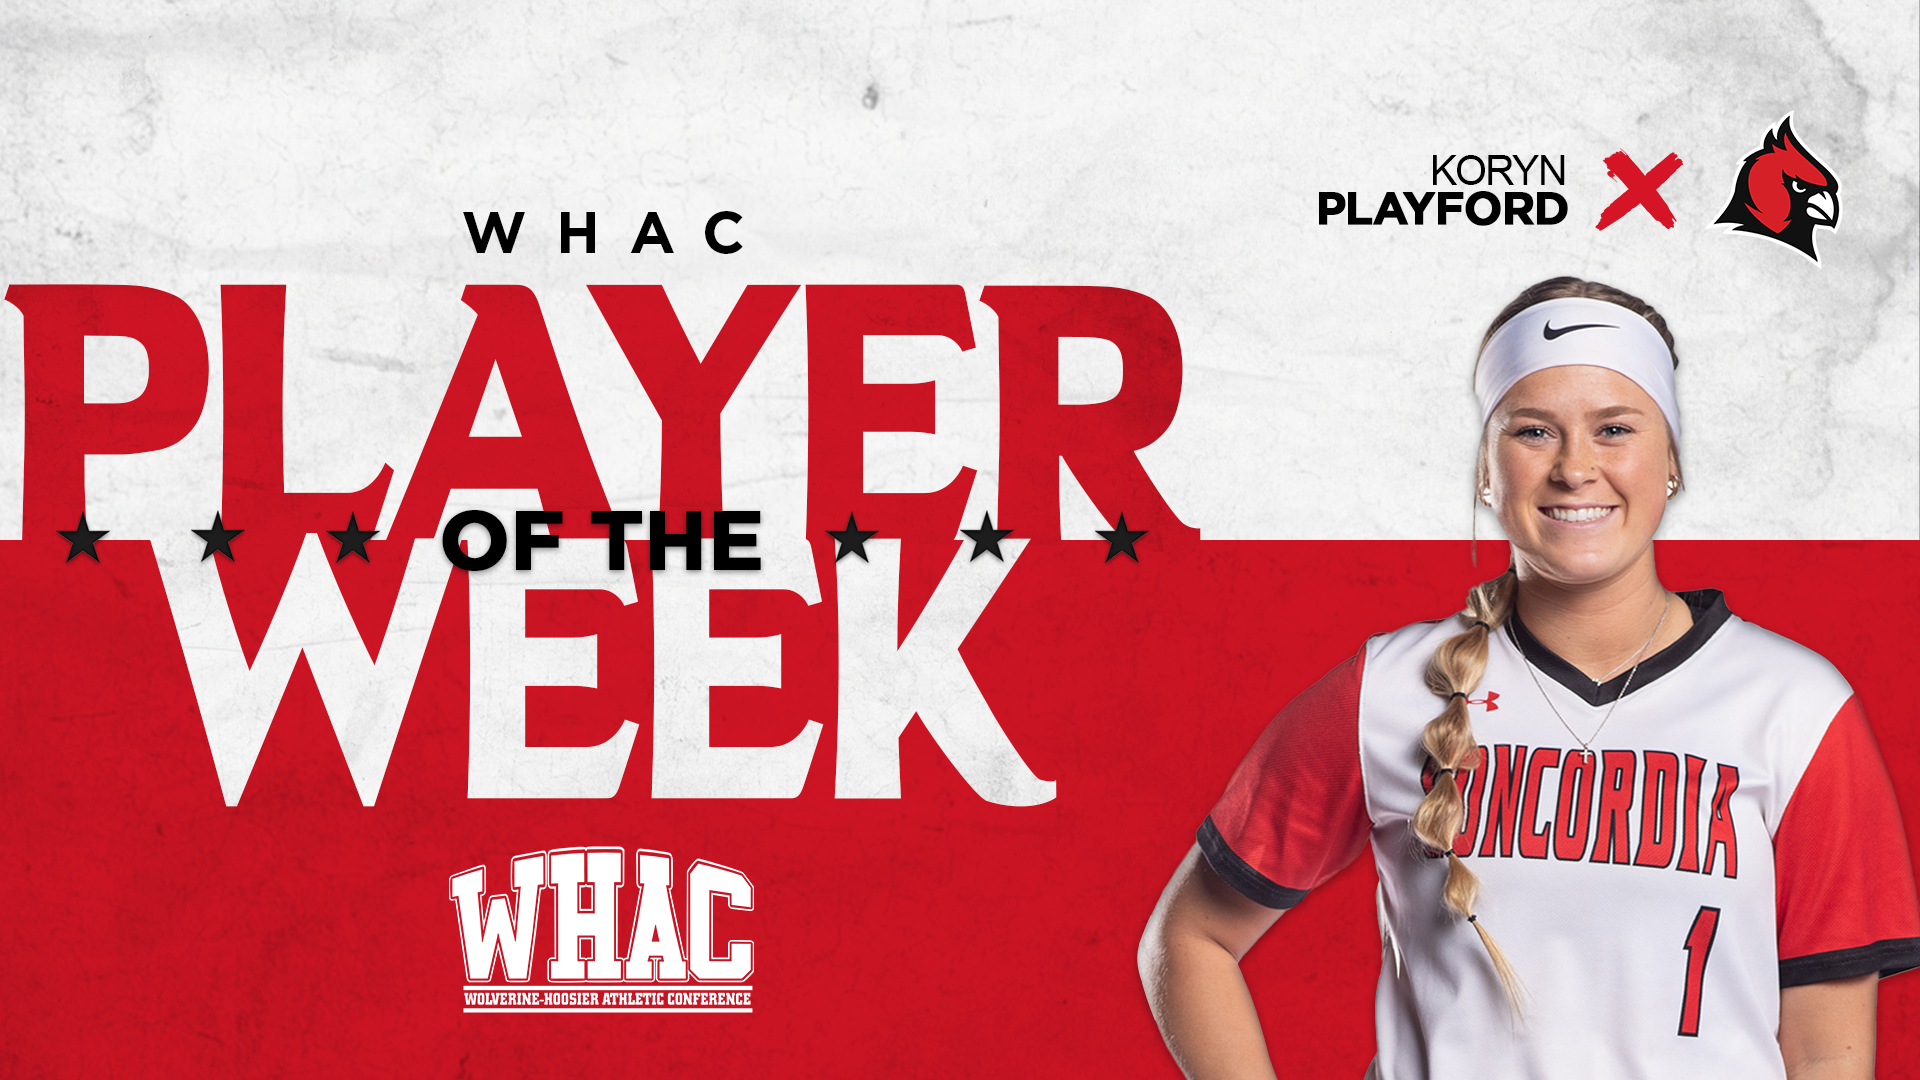 Playford takes home WHAC & NCCAA Player of the Week honors